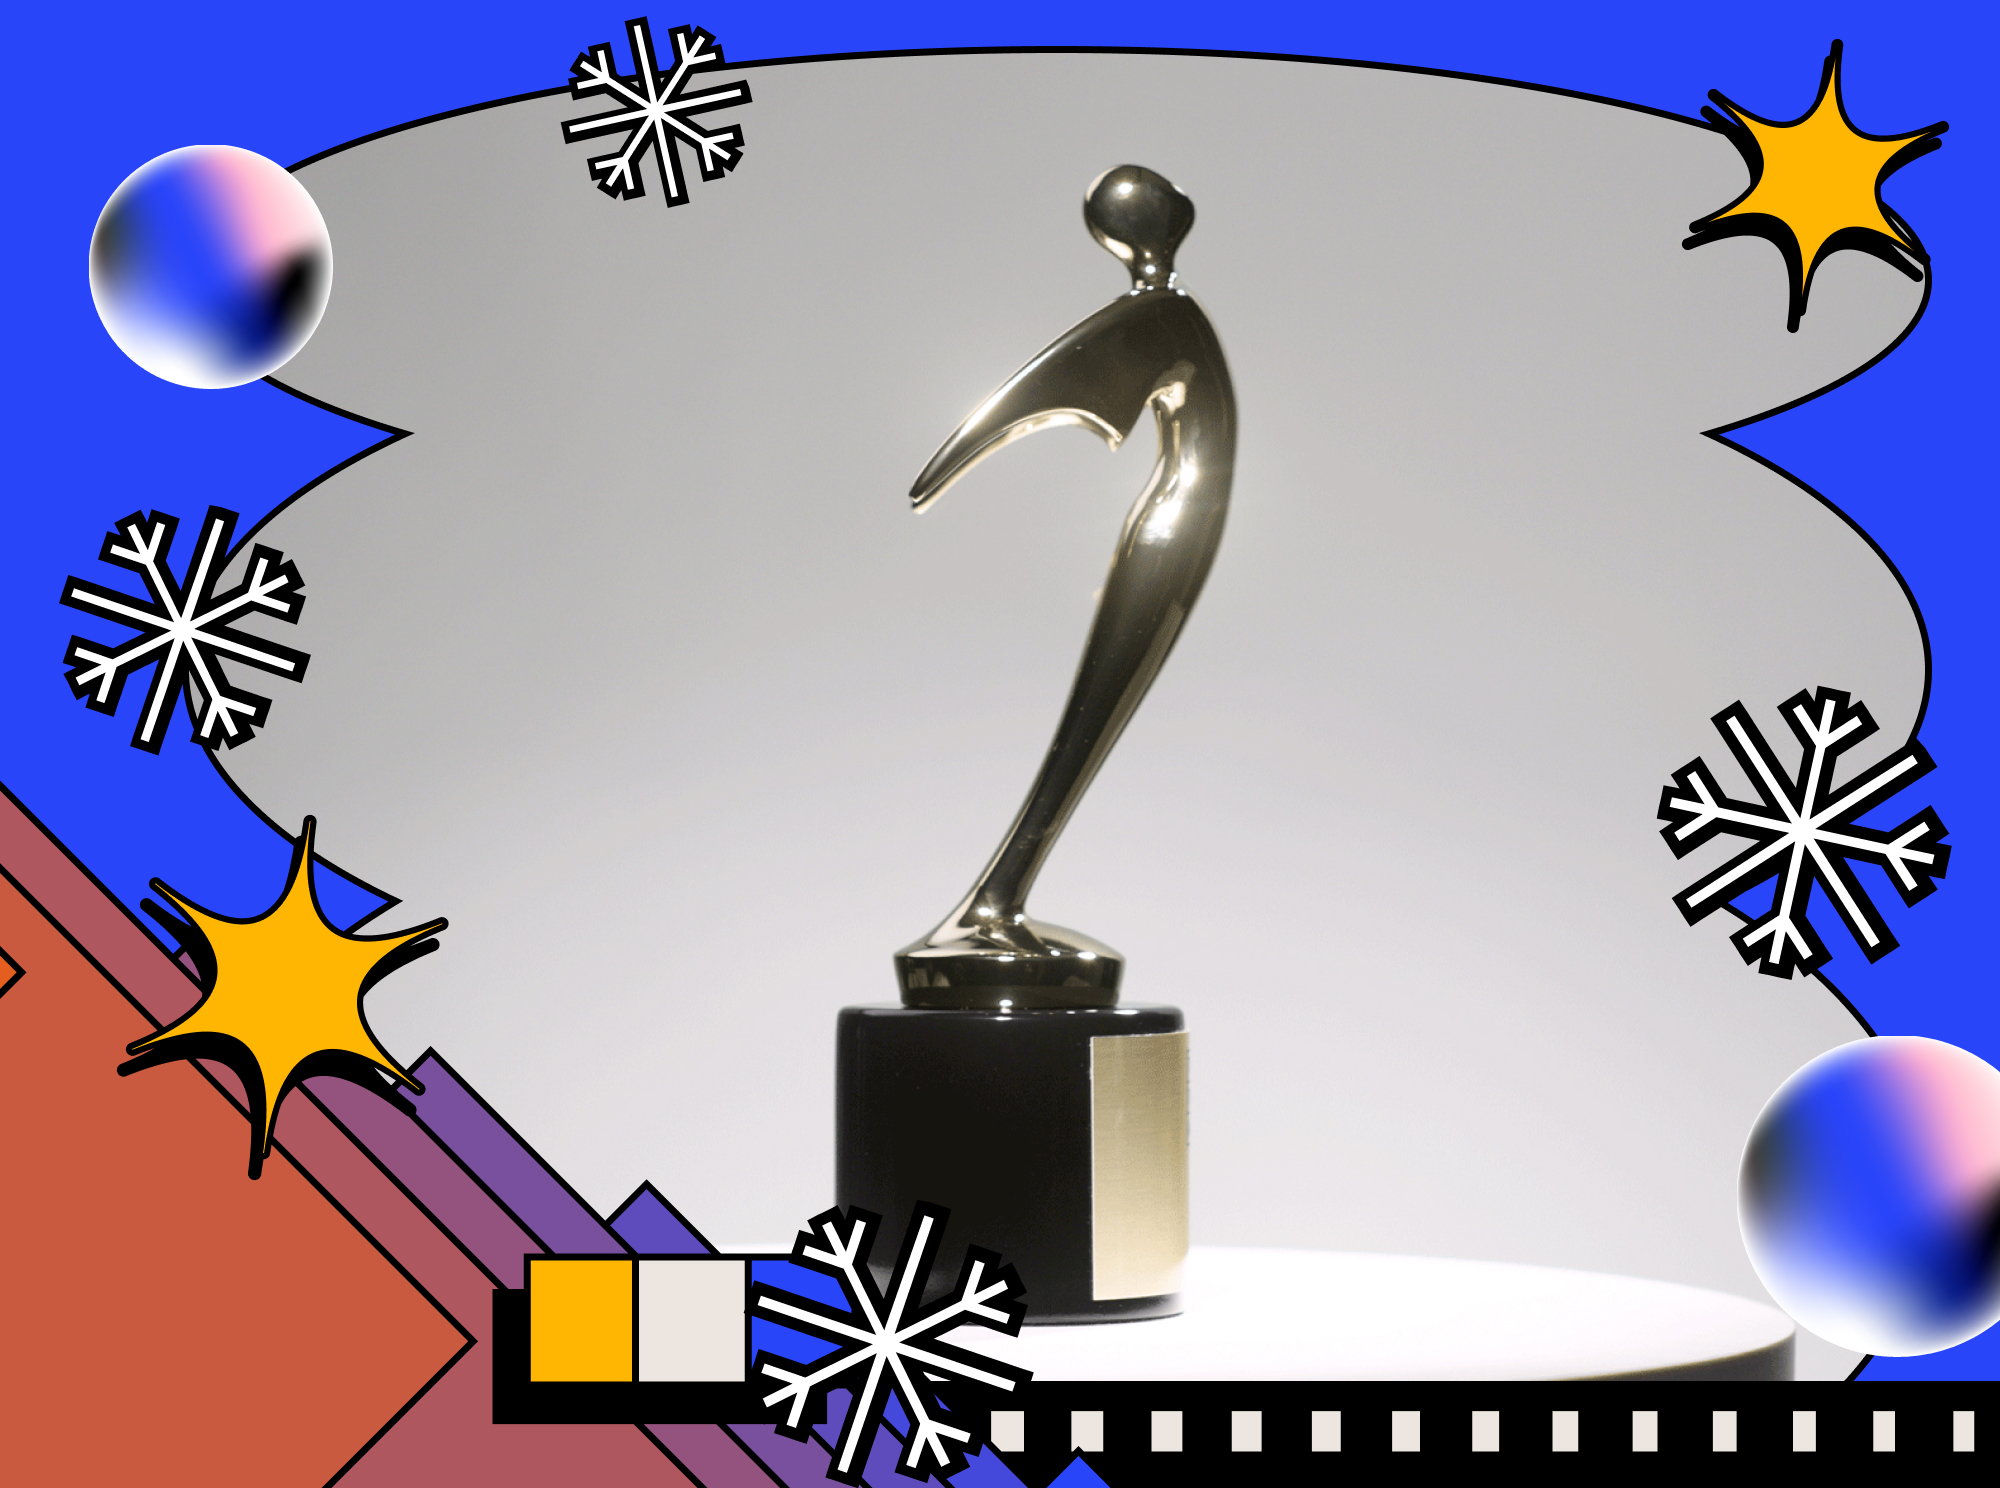 Don’t Miss Out on Giving the Gift of the Telly Awards